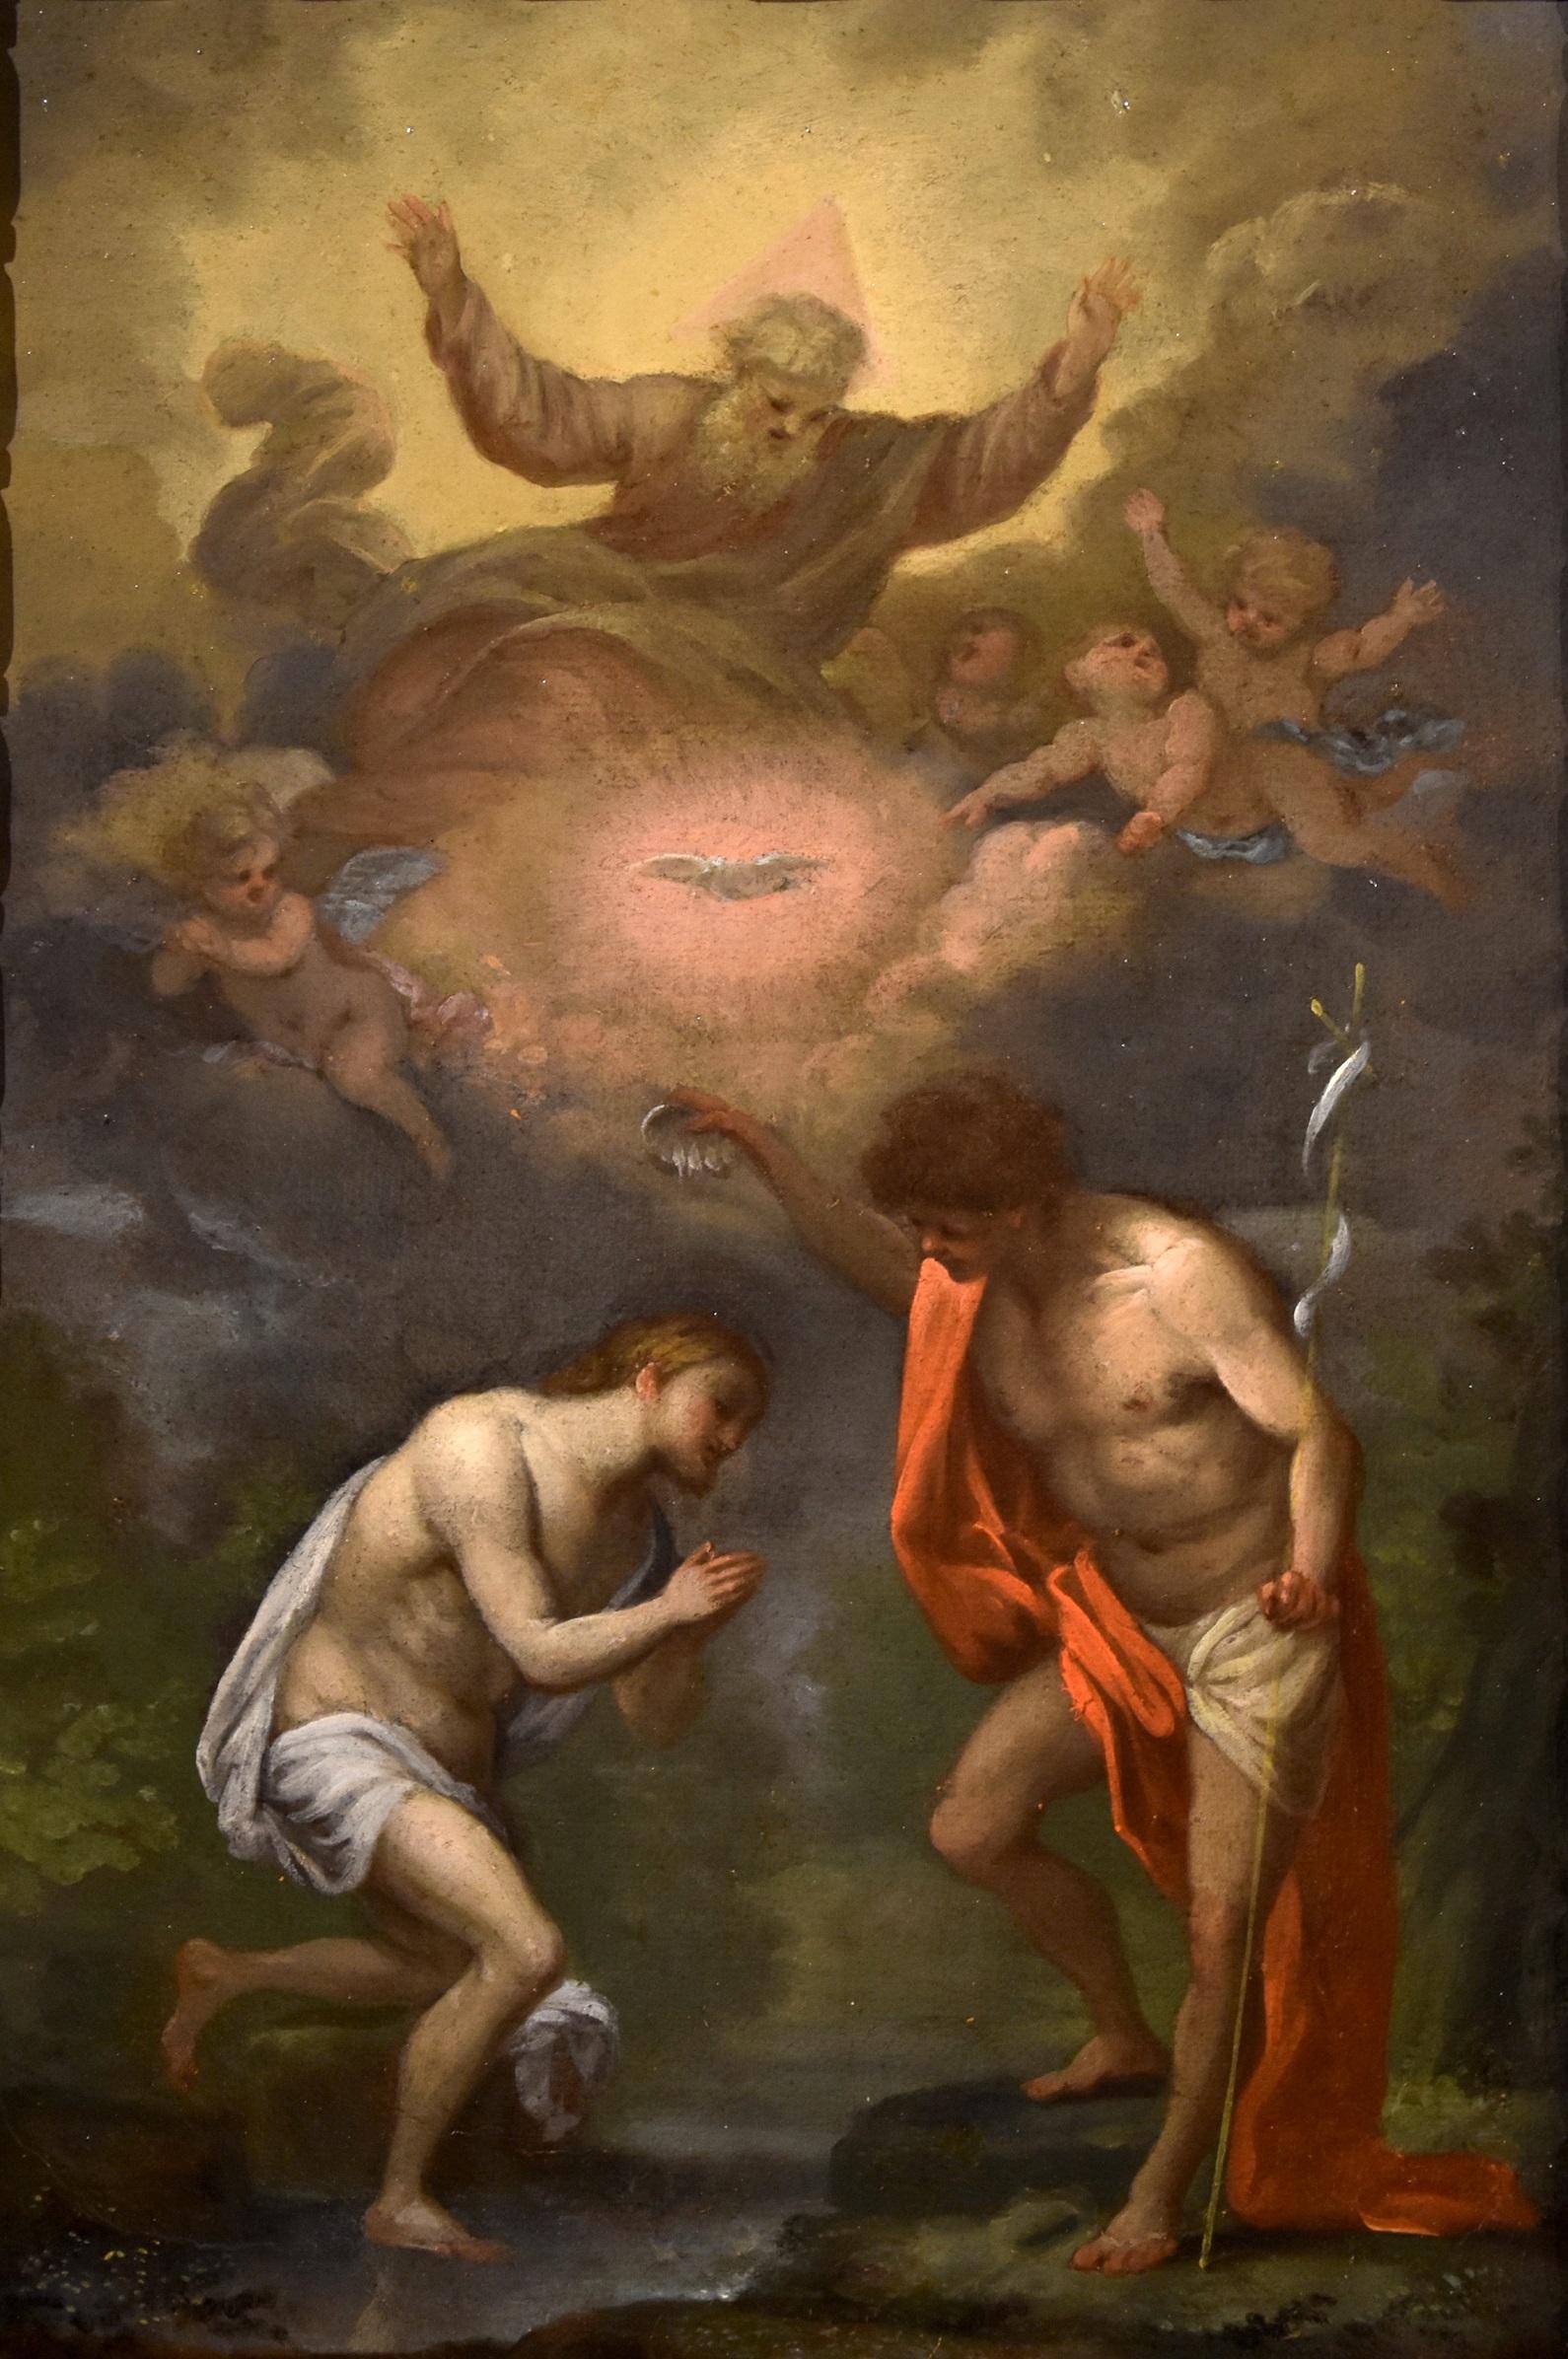 Baptism Christ God Paint Oil on canvas 17th Century Genoese School Old master - Painting by Genoese school of the late seventeenth century